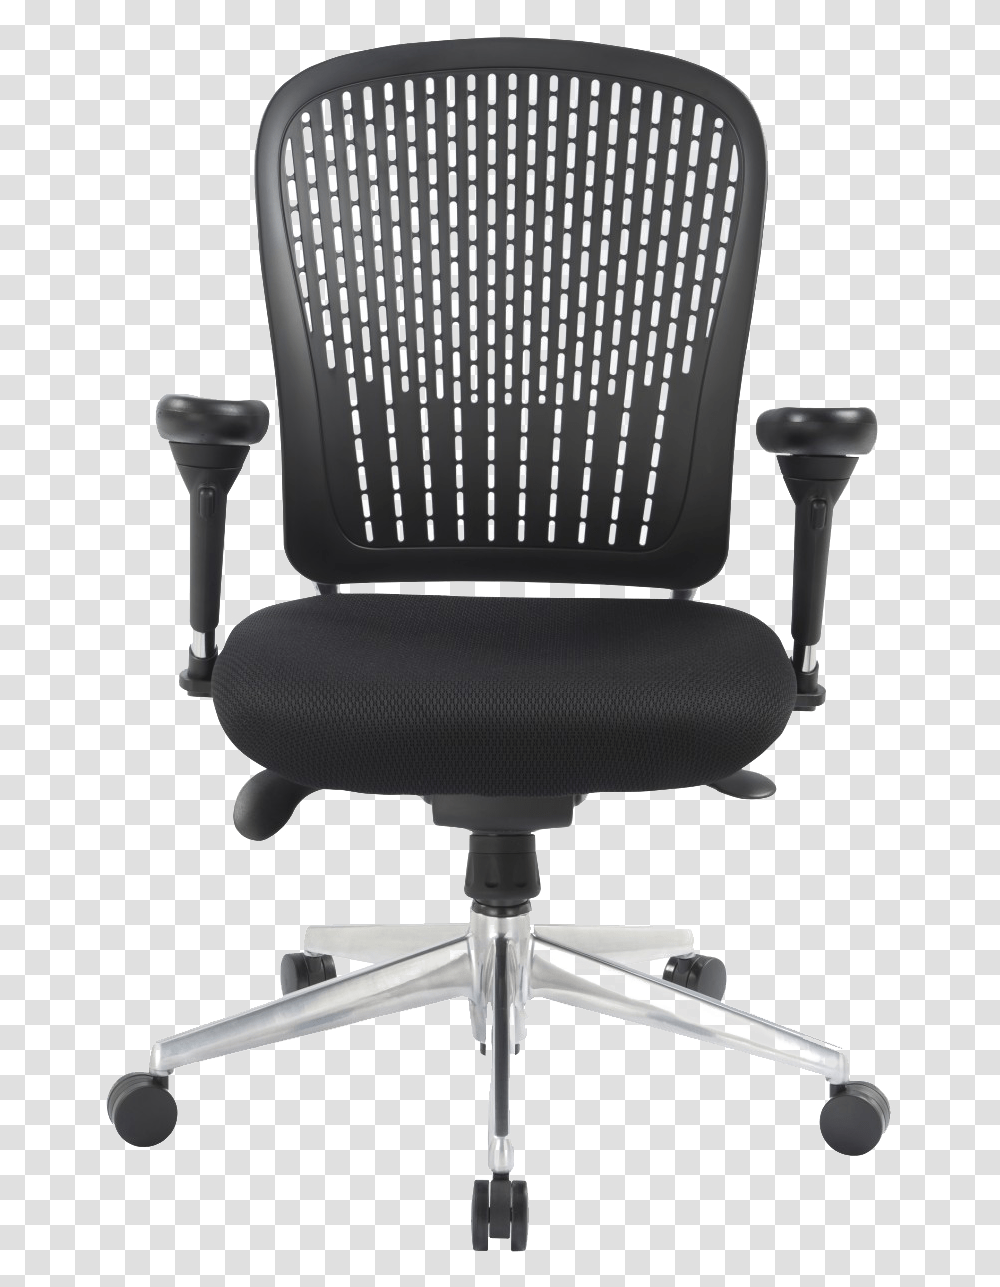 Office Chair Clipart Office Chair Image, Furniture, Armchair, Lamp, Cushion Transparent Png